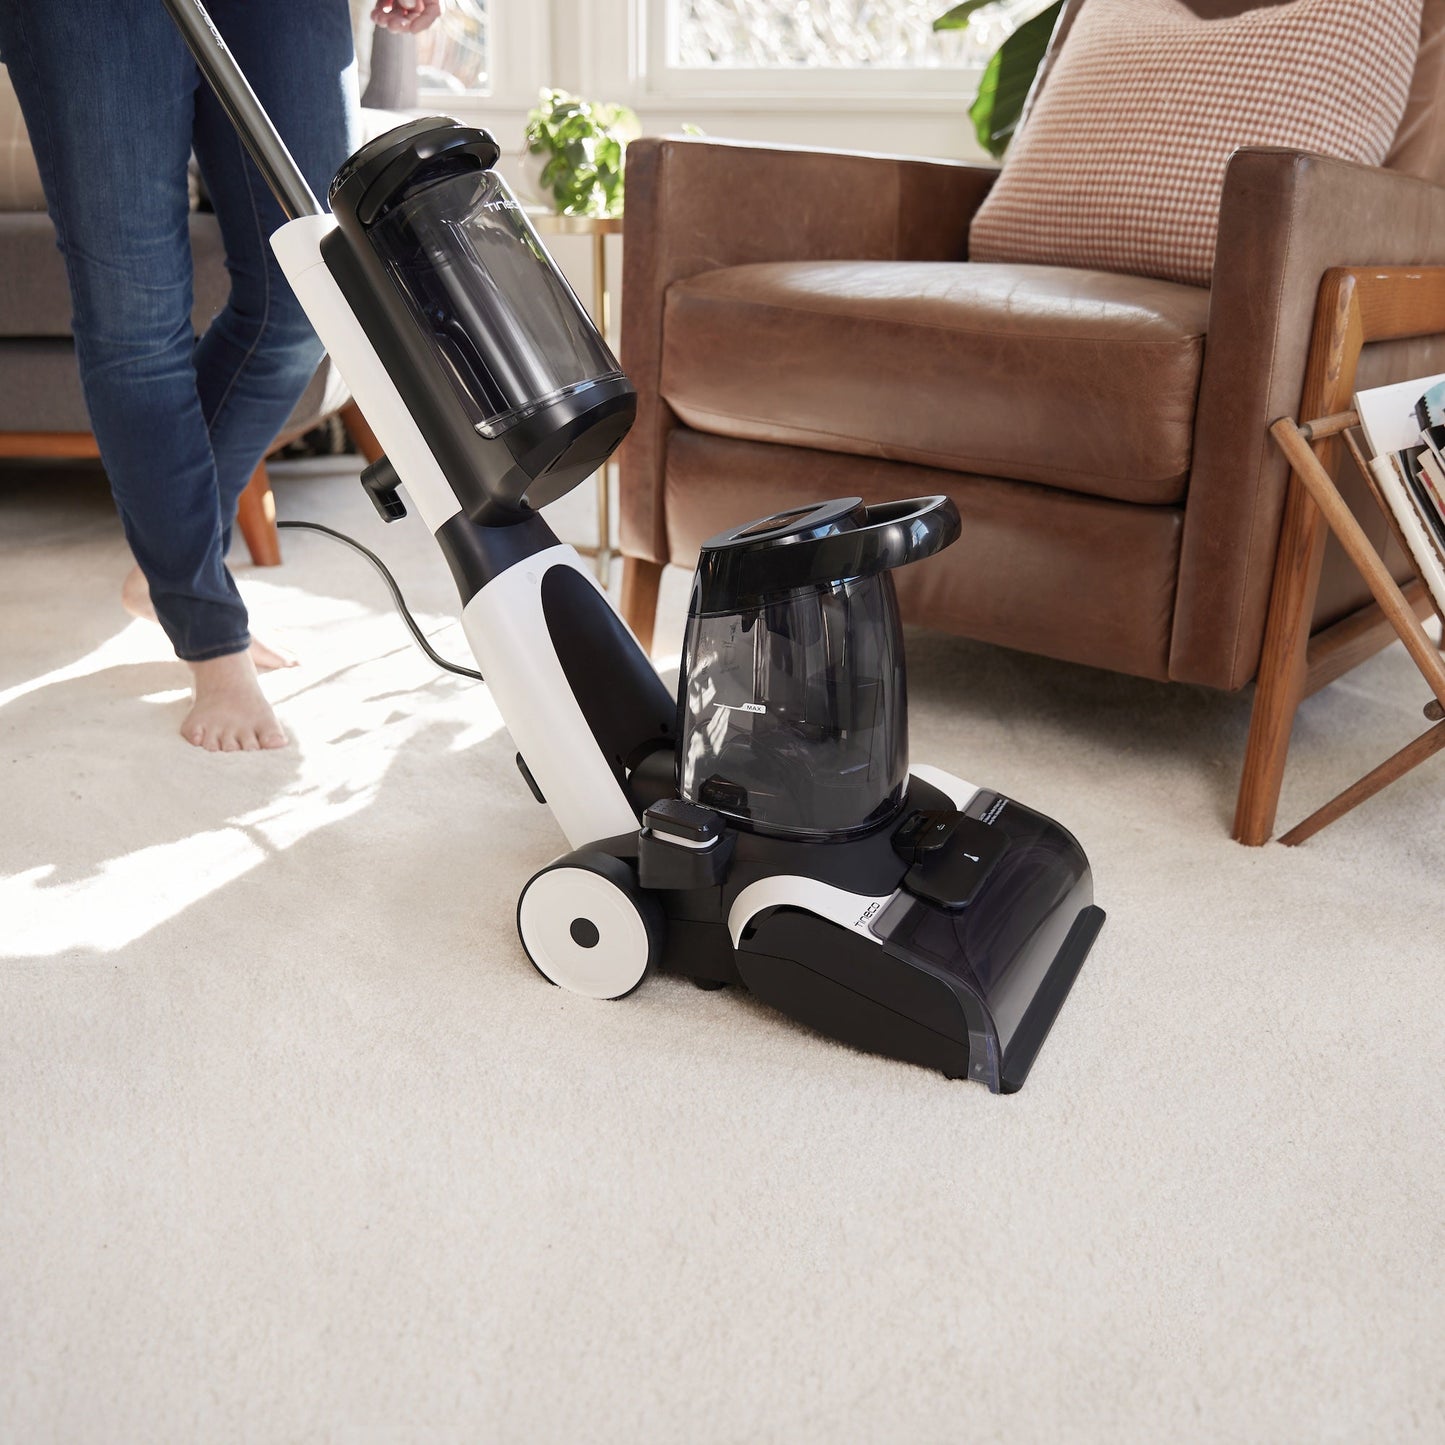 Tineco CARPET ONE PRO - 130W Suction Power, Heated Water Washing, Smart App